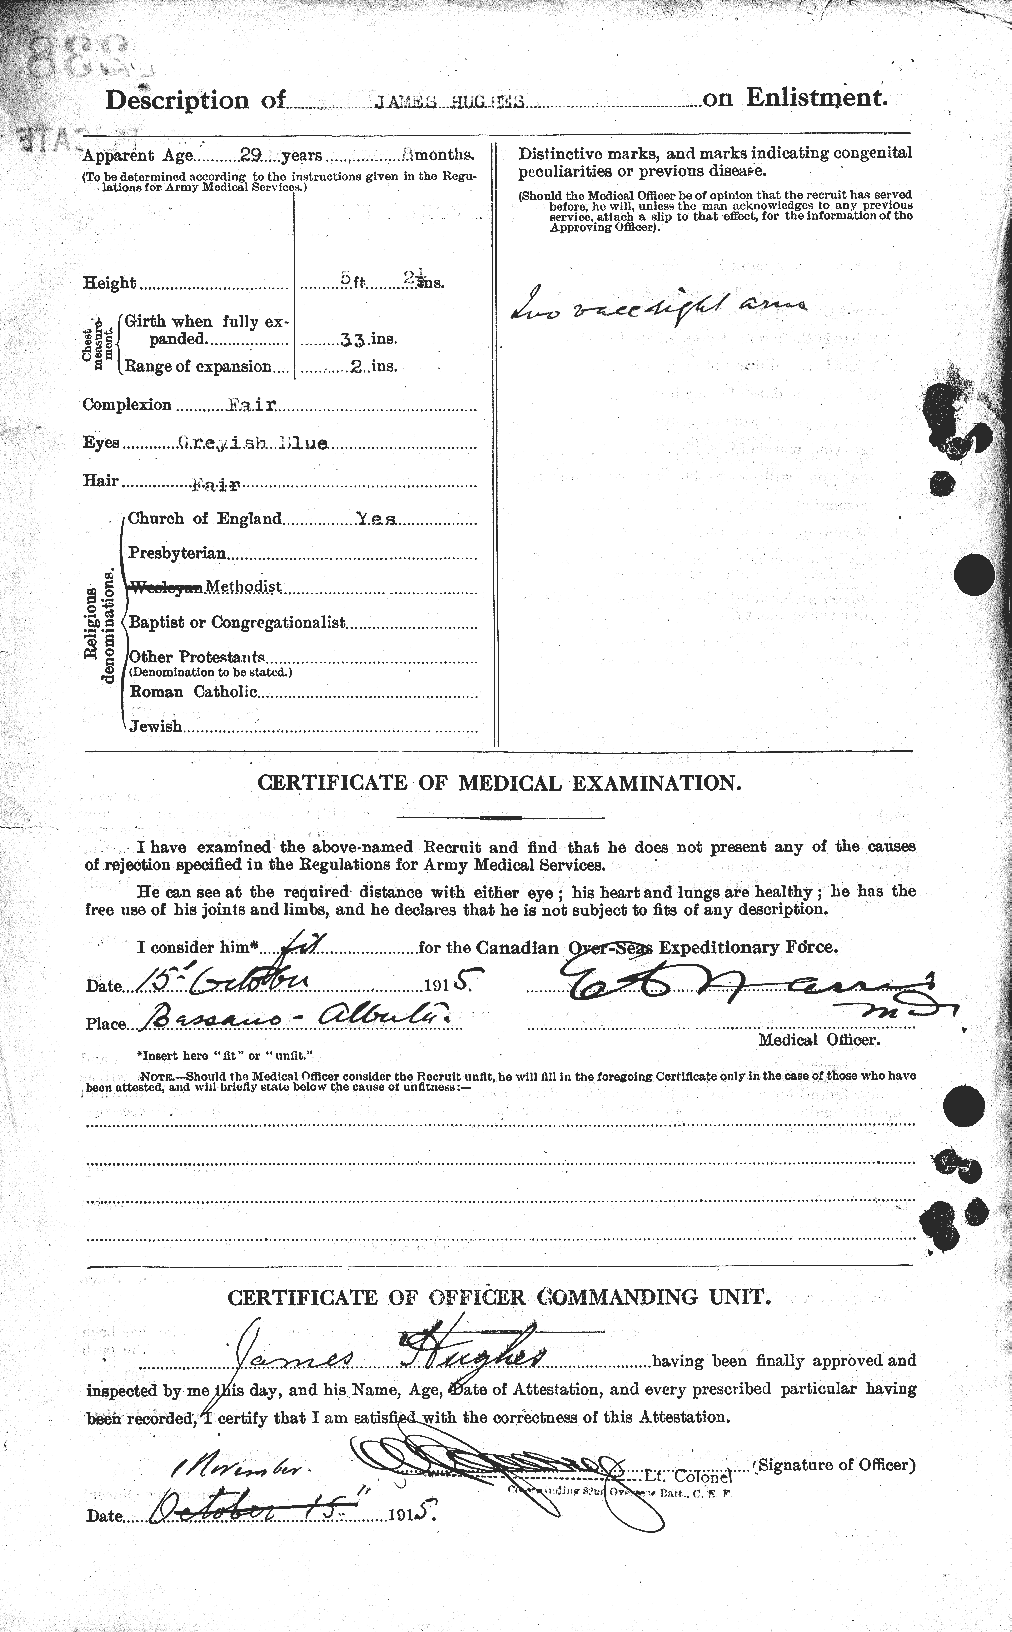 Personnel Records of the First World War - CEF 403944b